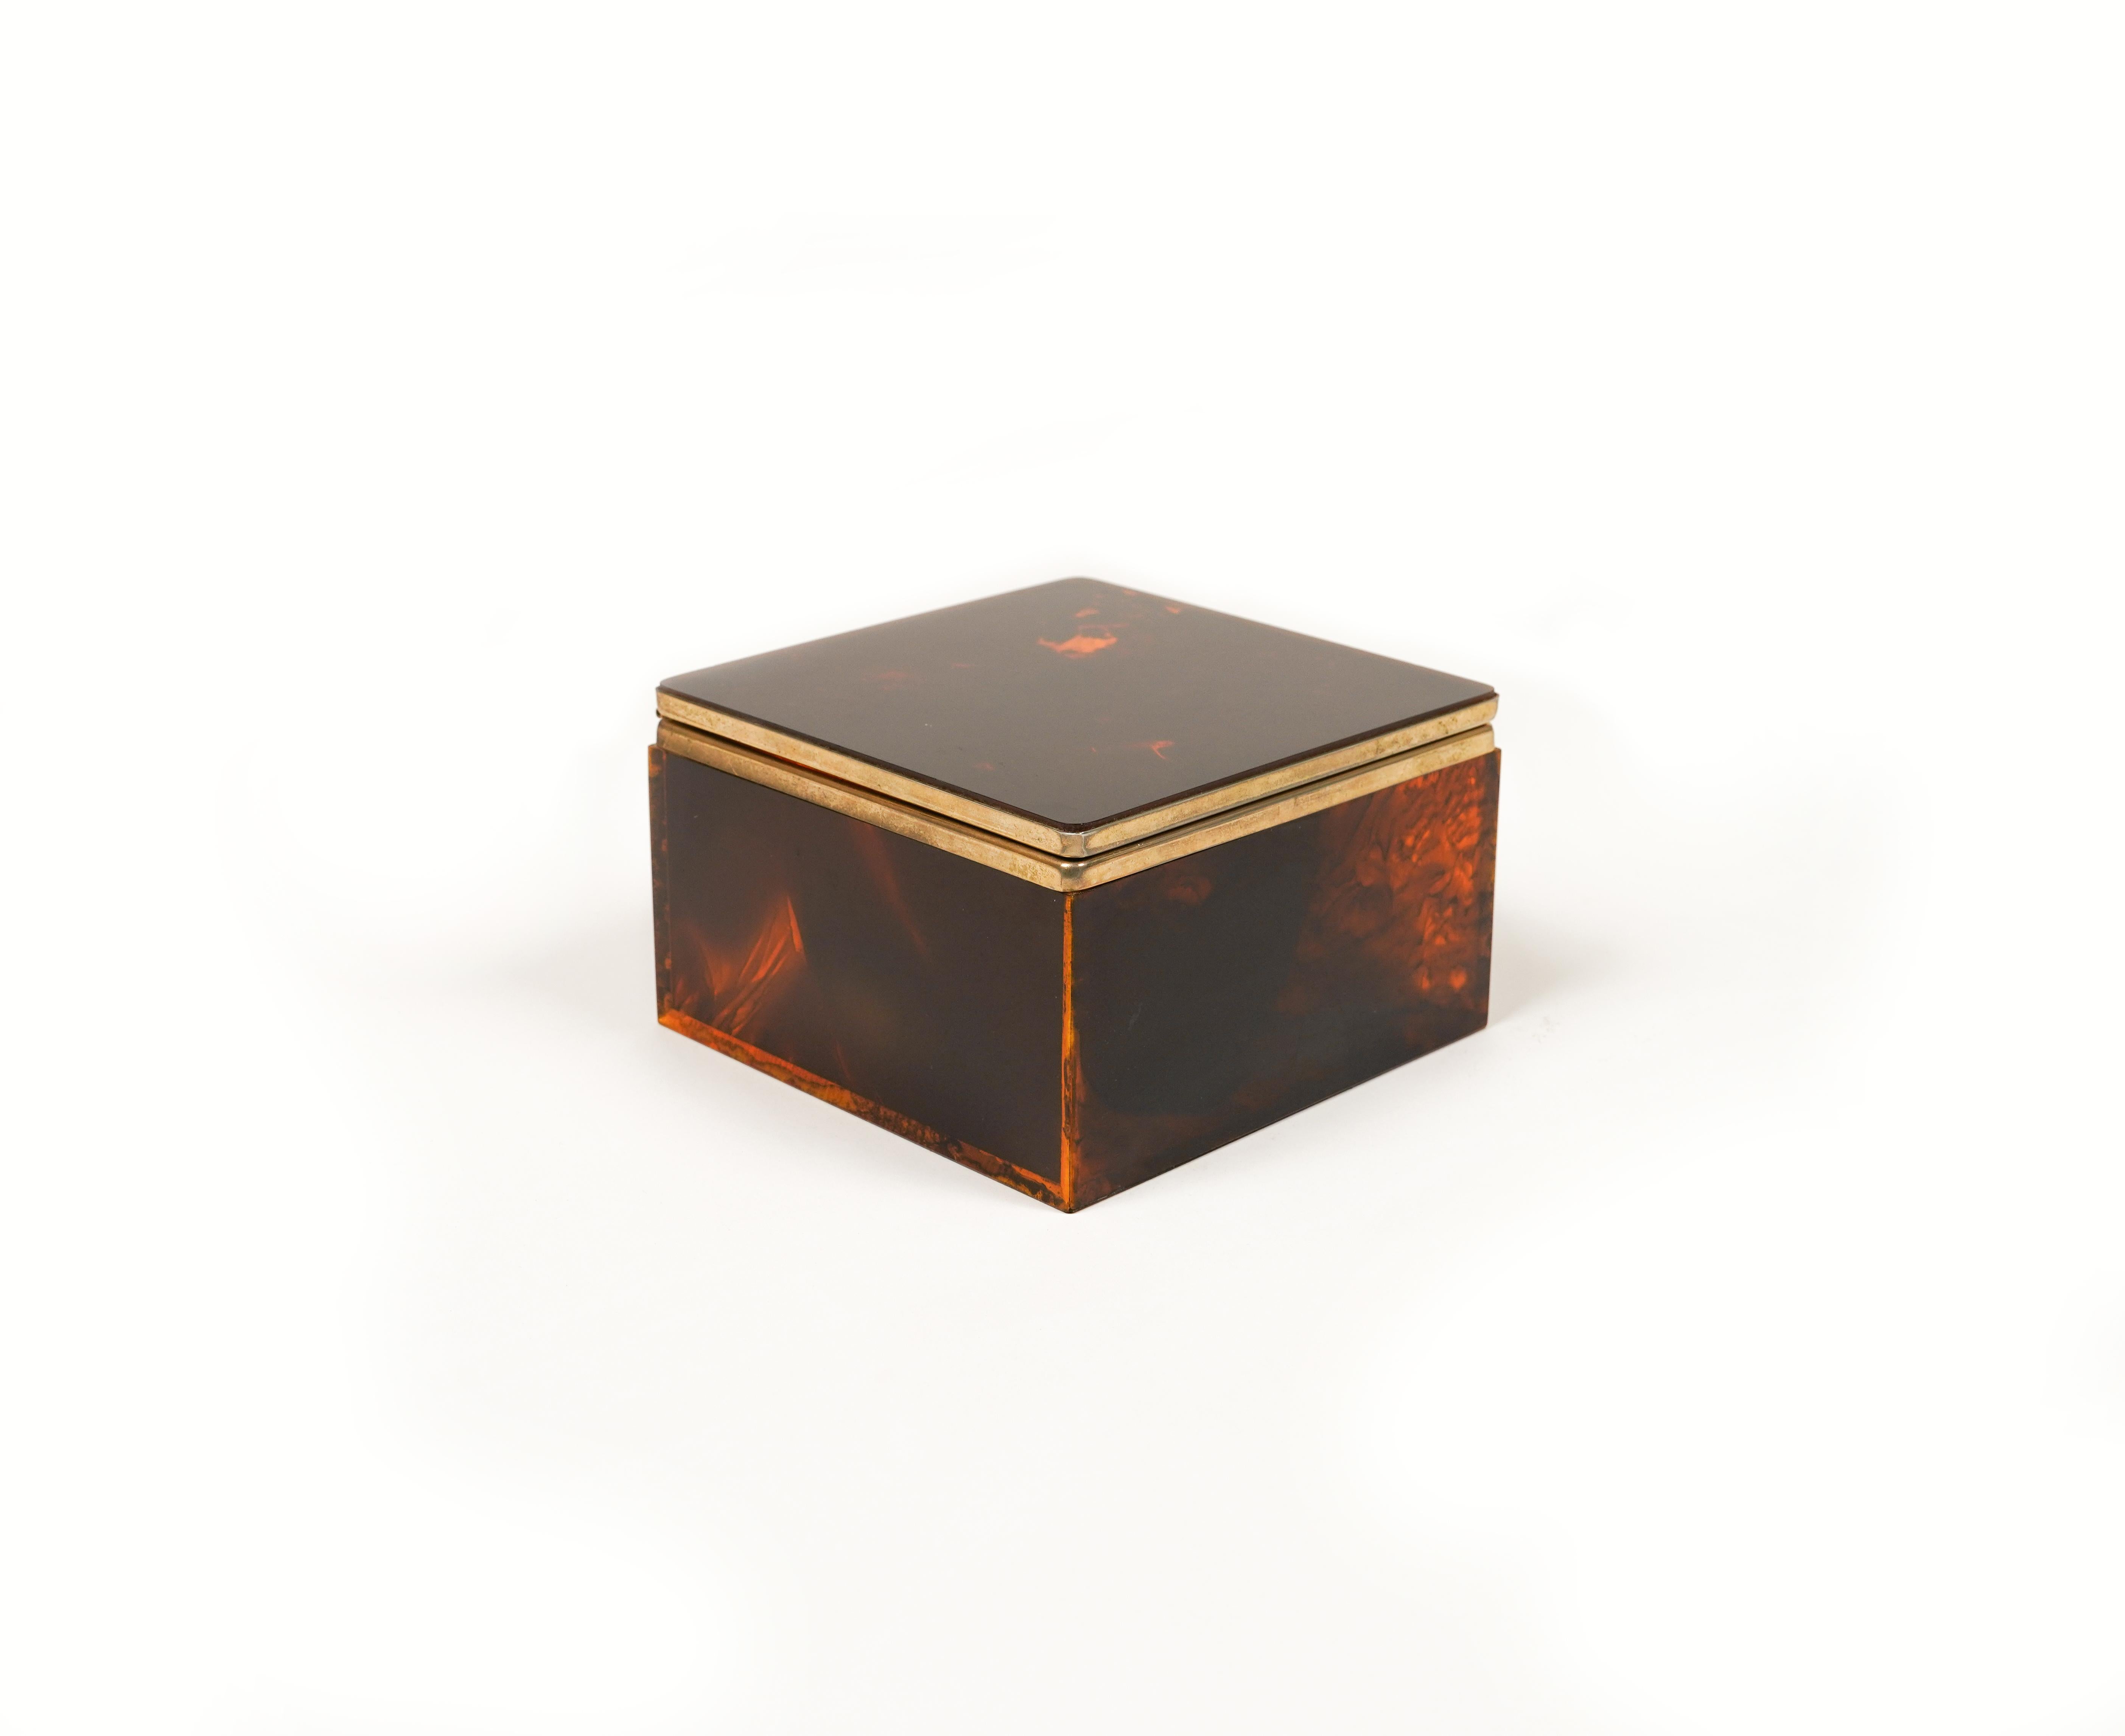 Late 20th Century Squared Box in Faux Tortoiseshell Lucite Christian Dior Style, Italy 1970s For Sale